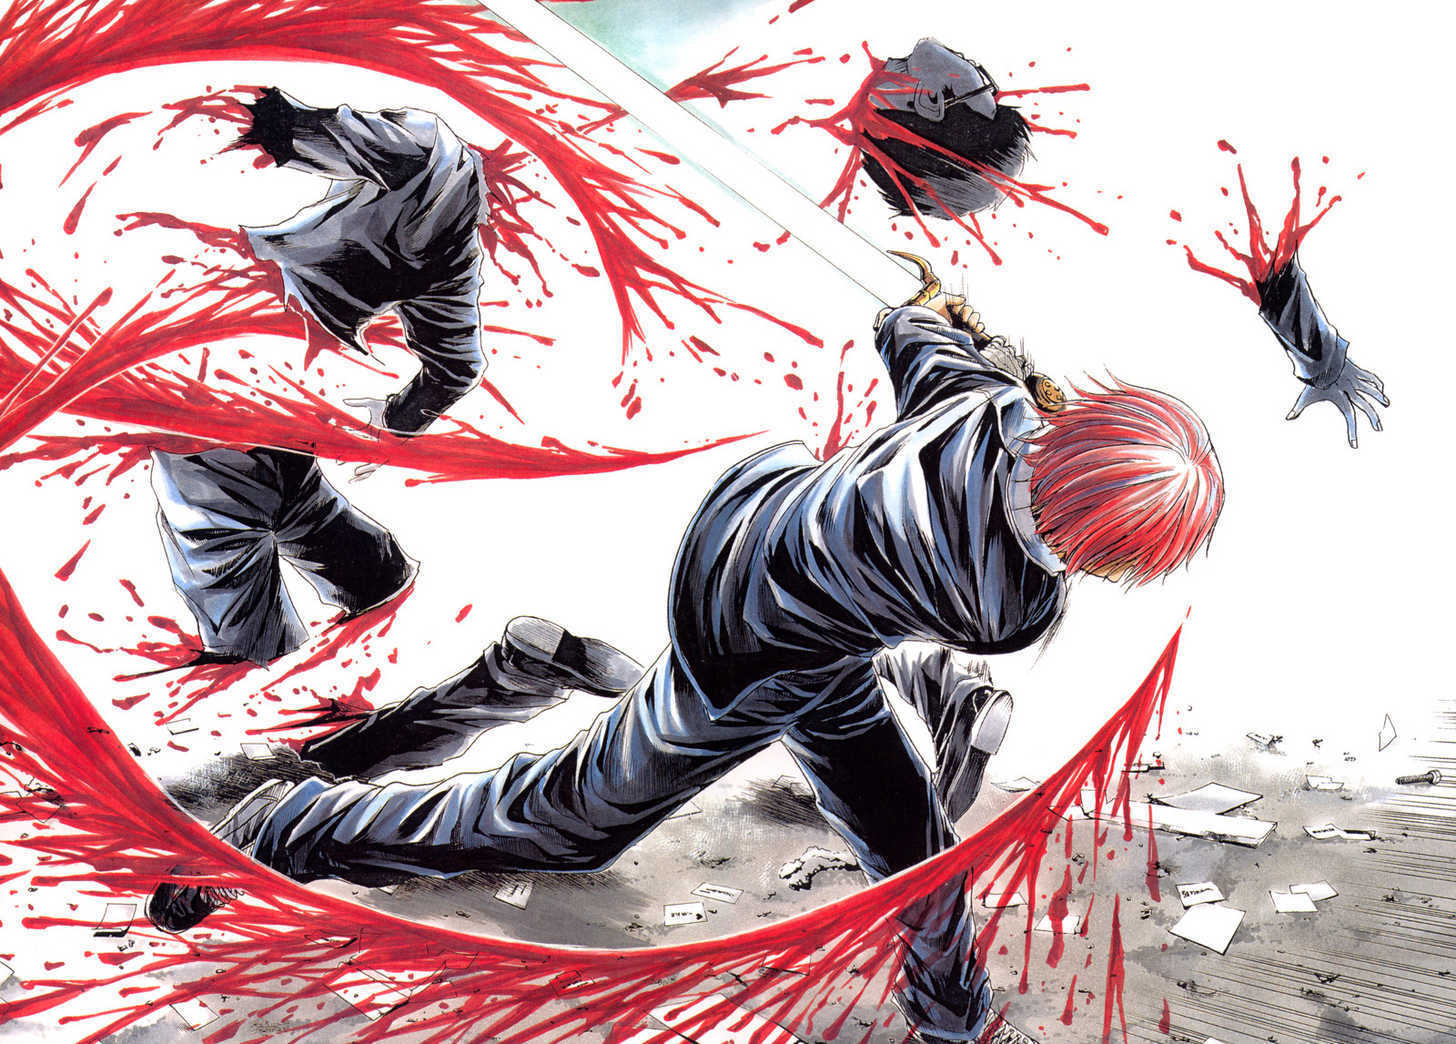 Free download violent anime wallpaper Image Frompo 1 1456x1044